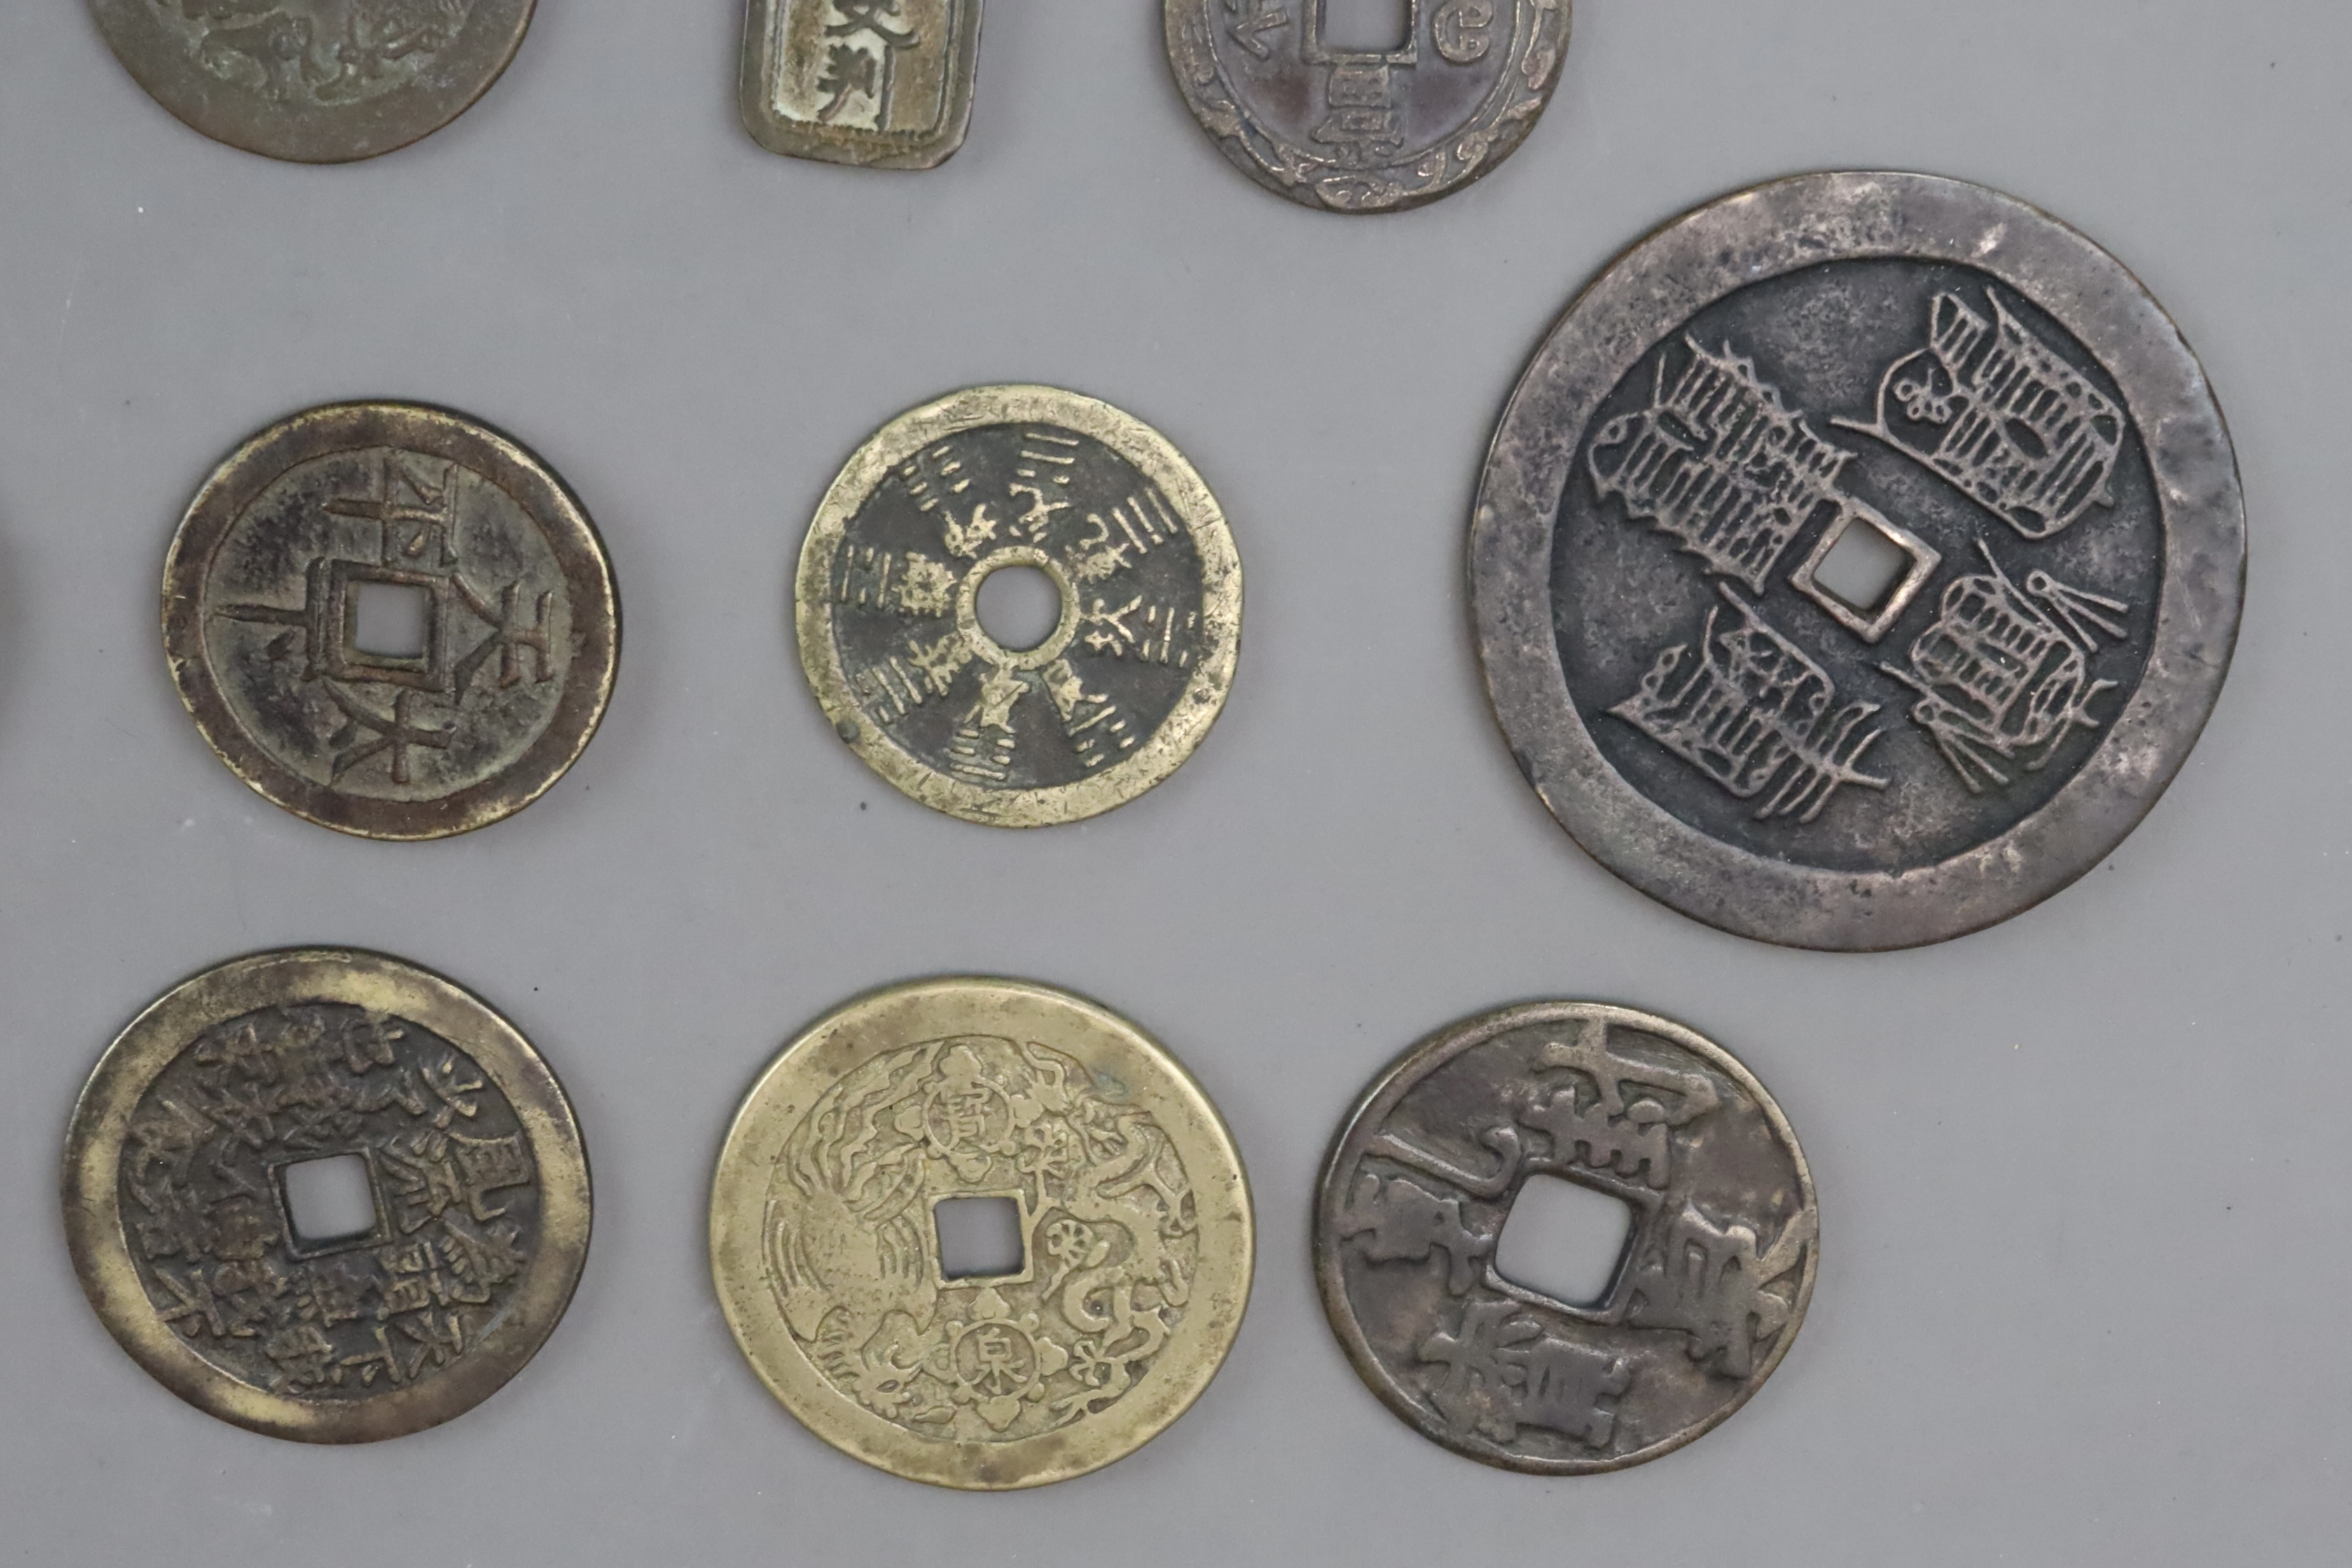 A Set of 12 Chinese Taoism Coins, Qing dynasty - Image 8 of 8